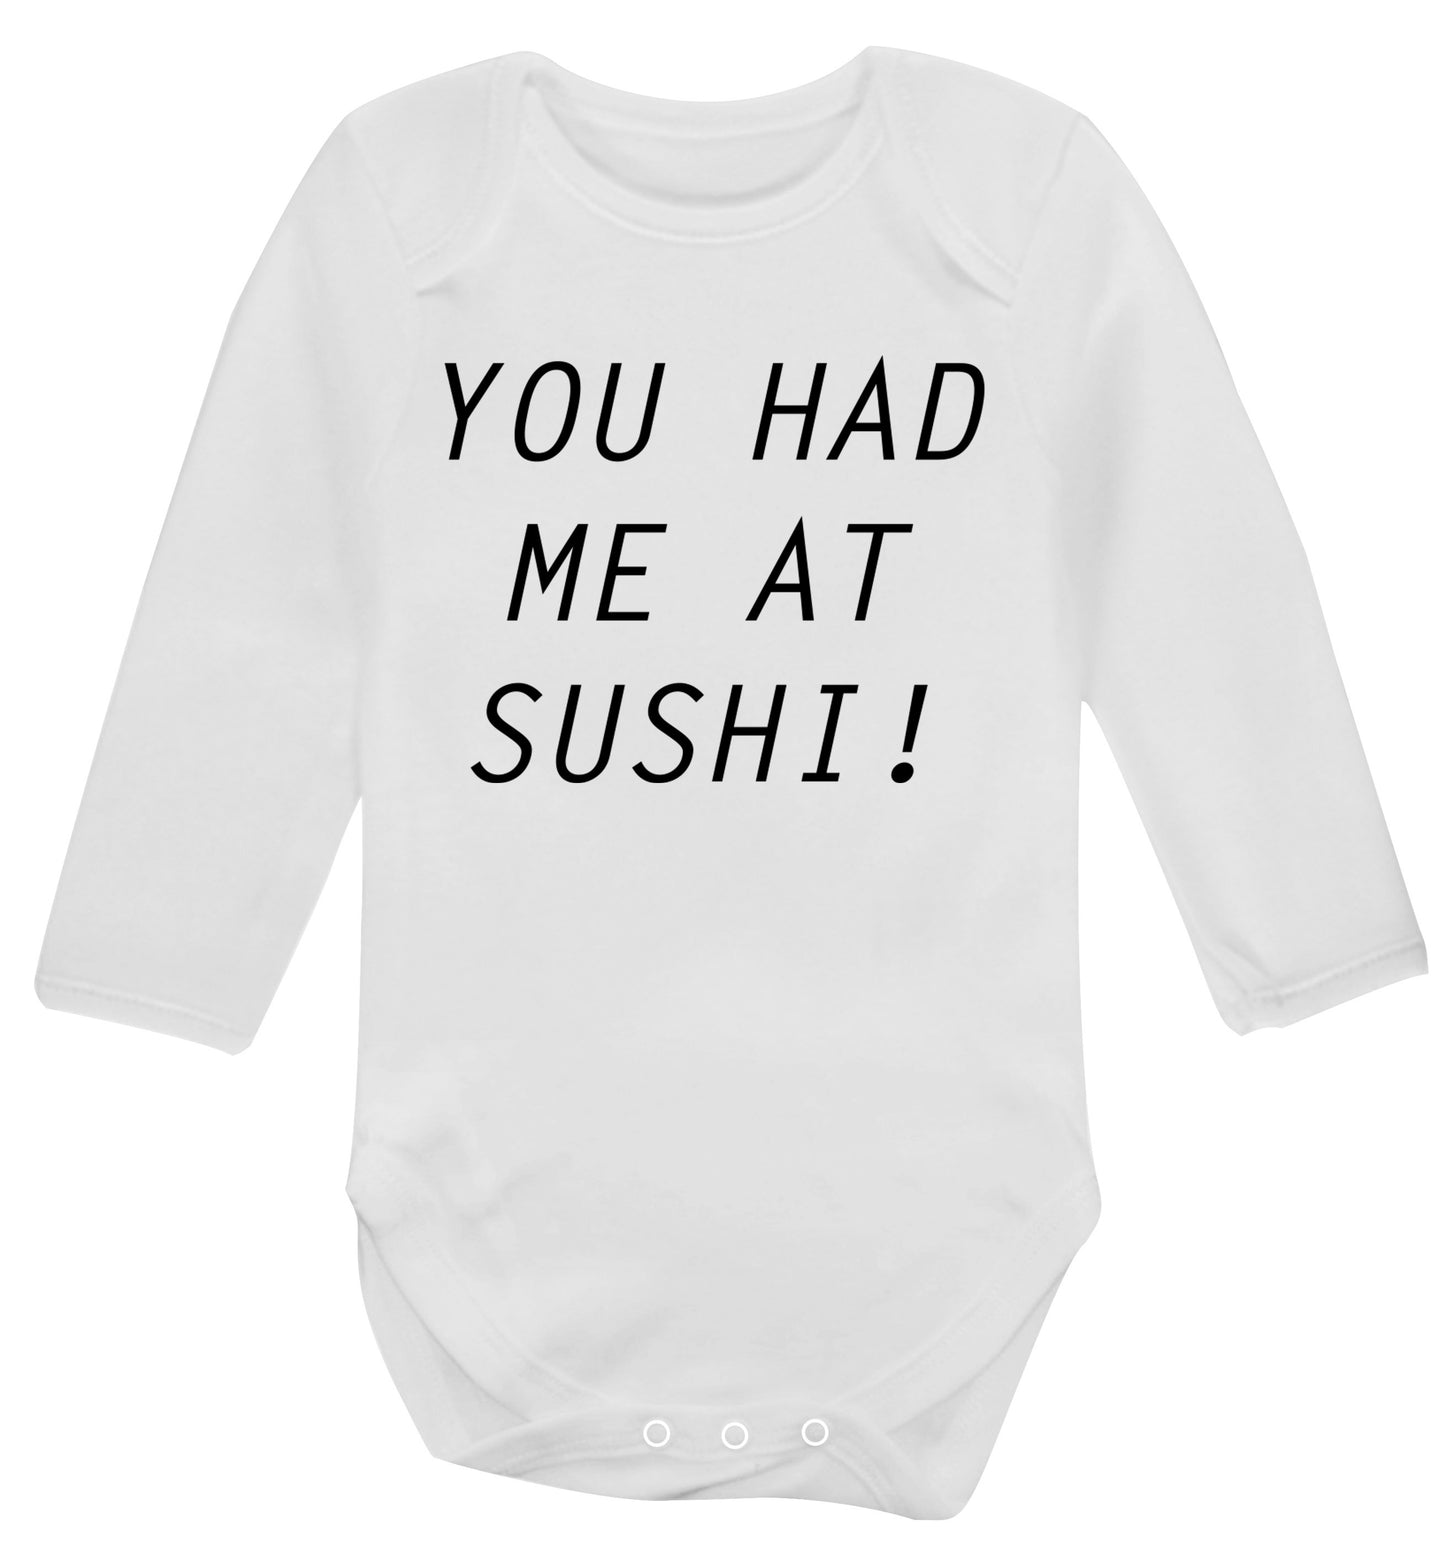 You had me at sushi Baby Vest long sleeved white 6-12 months